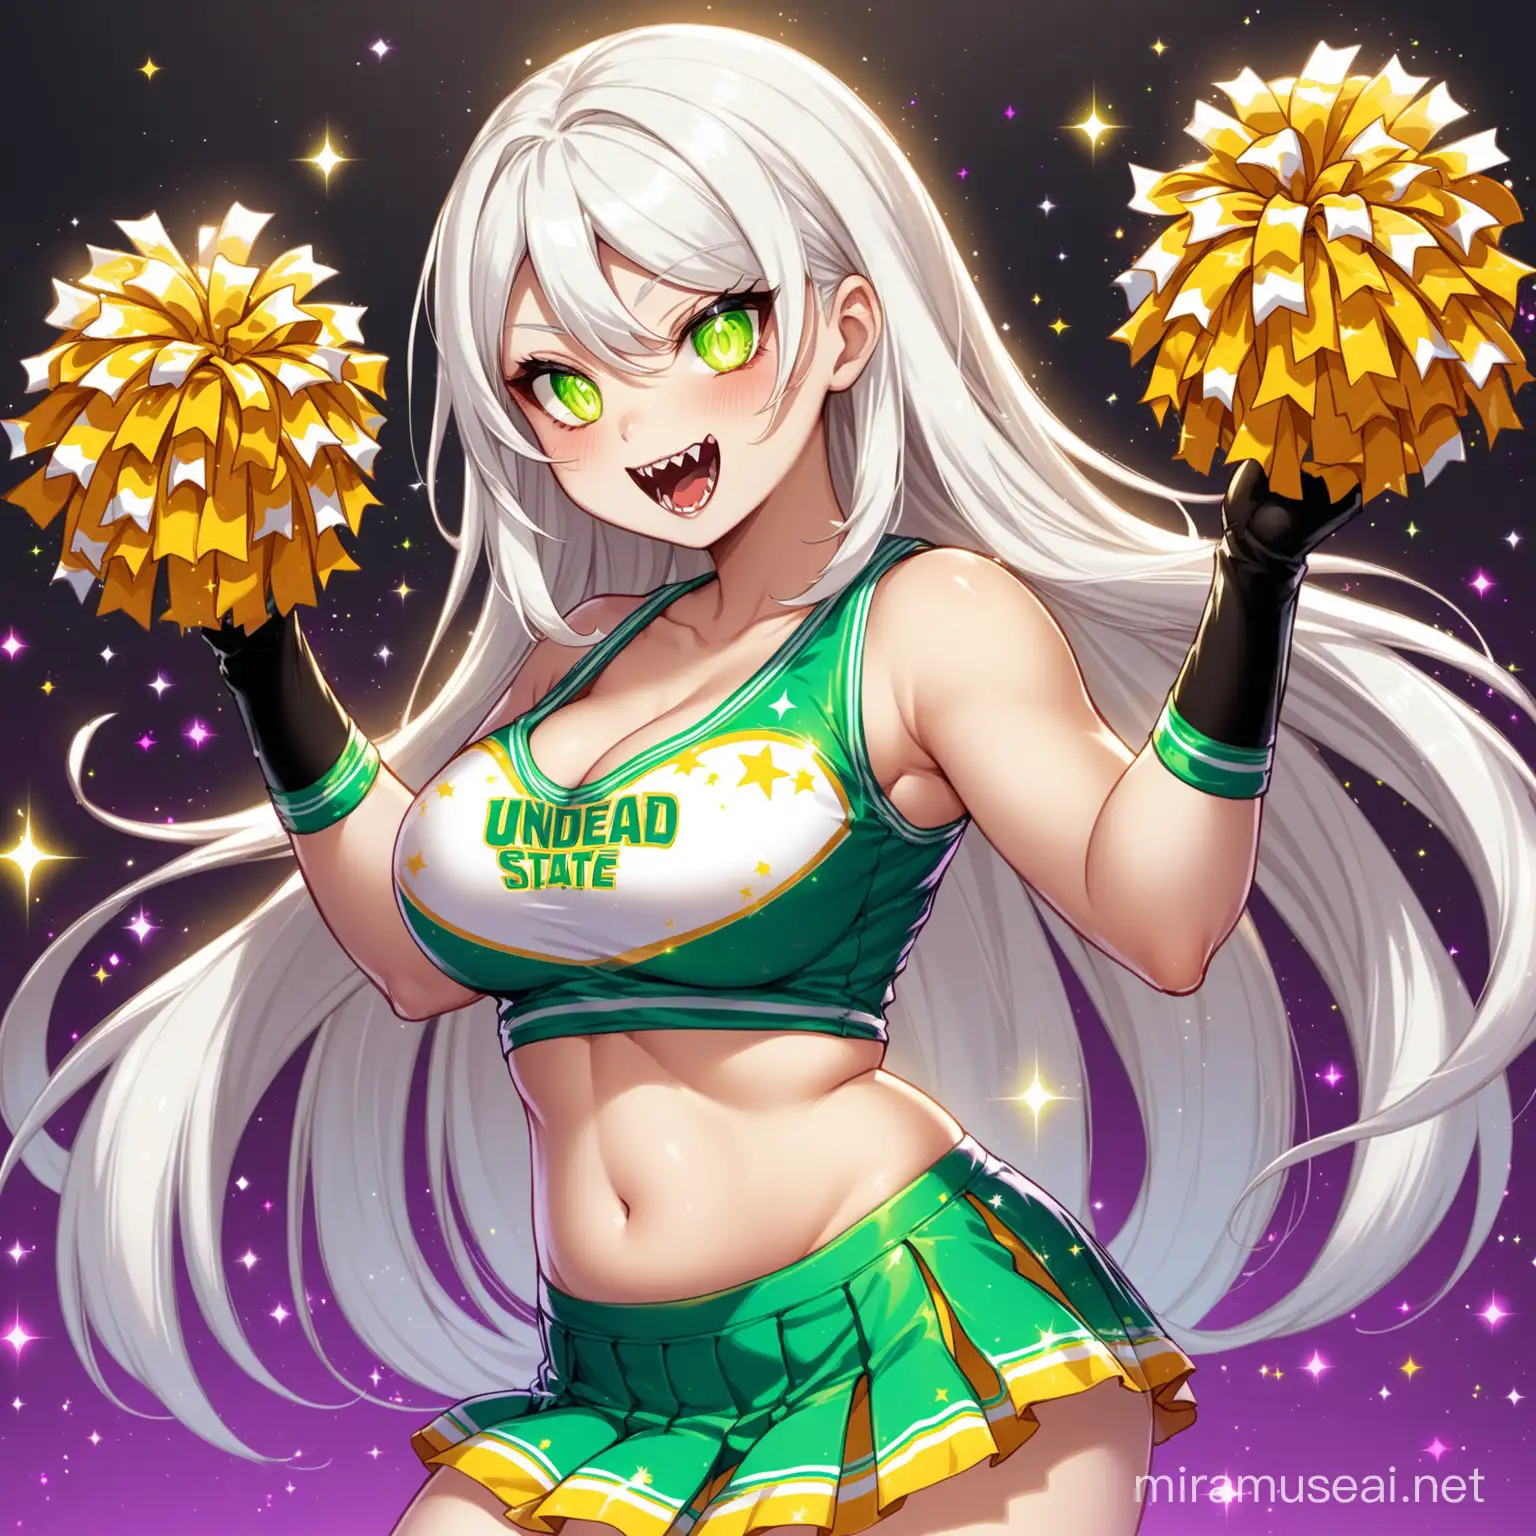 Cream-colored skin with a faint green
Long, flowing white hair that seems to shimmer and move on its own
Bright, friendly eyes that sparkle with excitement
Curvaceous figure that doesn't gain weight easily due to her undead state
Often wears bright colors and cheerleader-inspired outfit